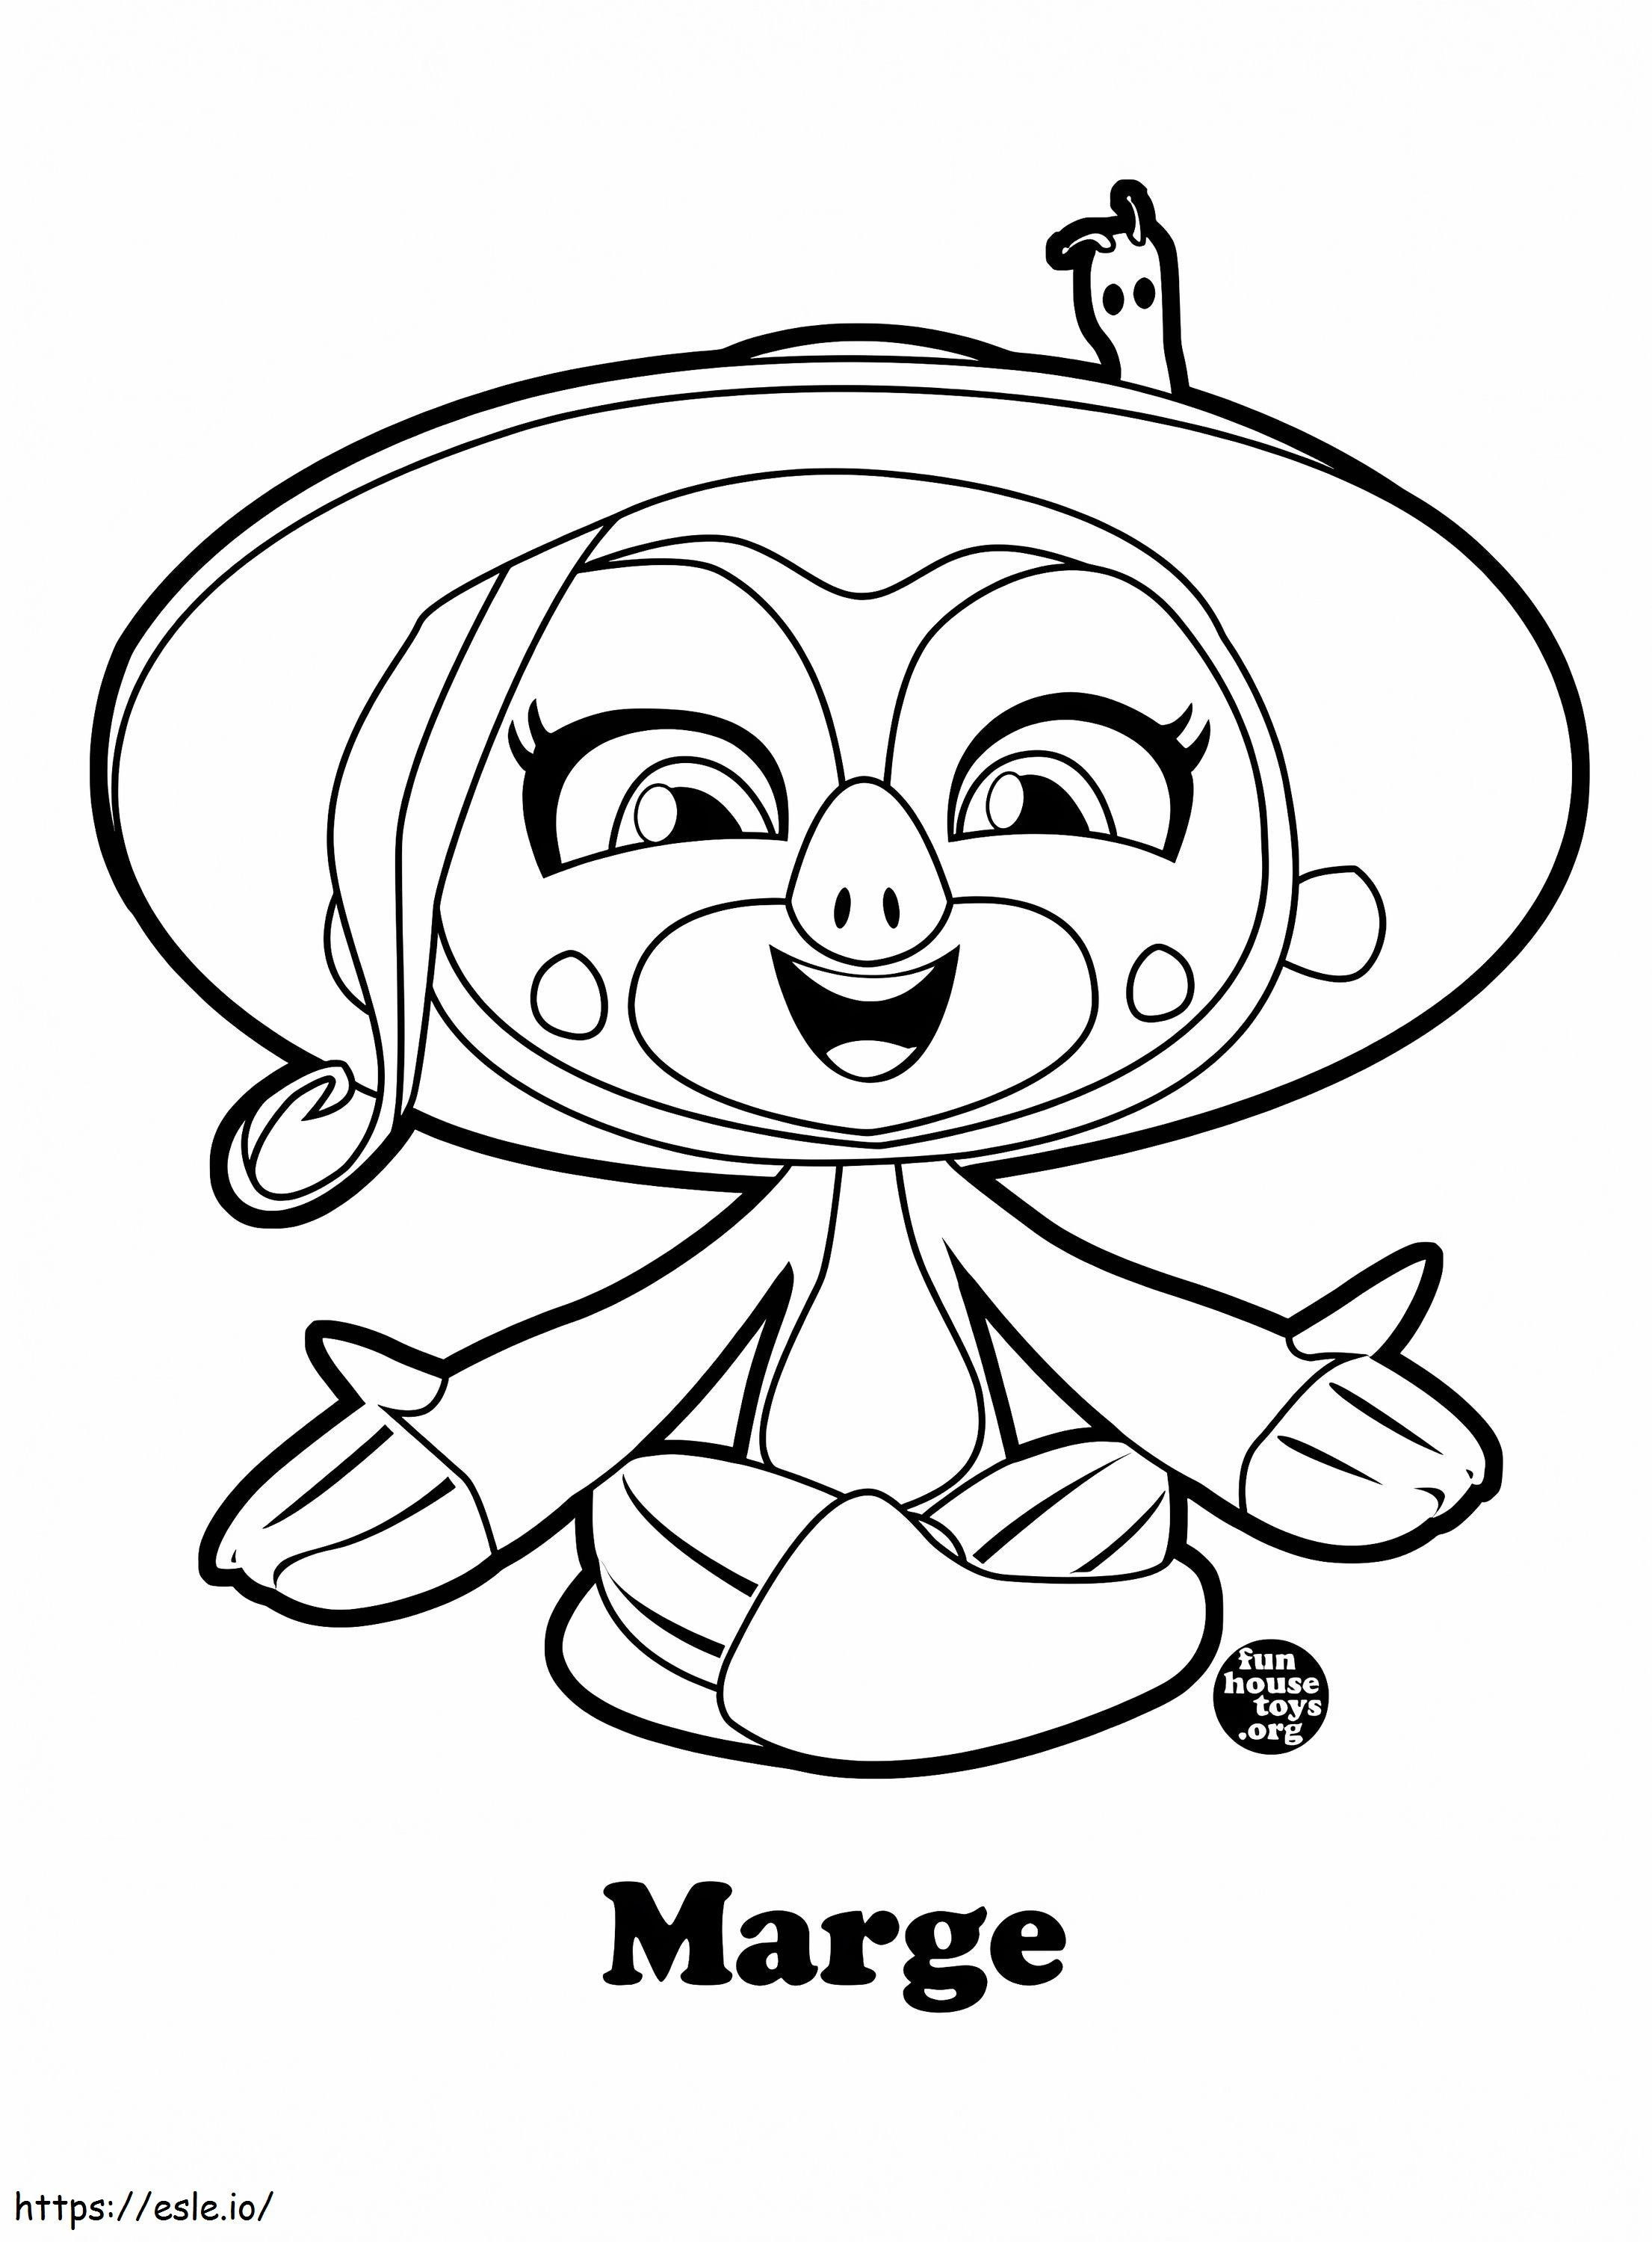 1592615022 235325235235 coloring page